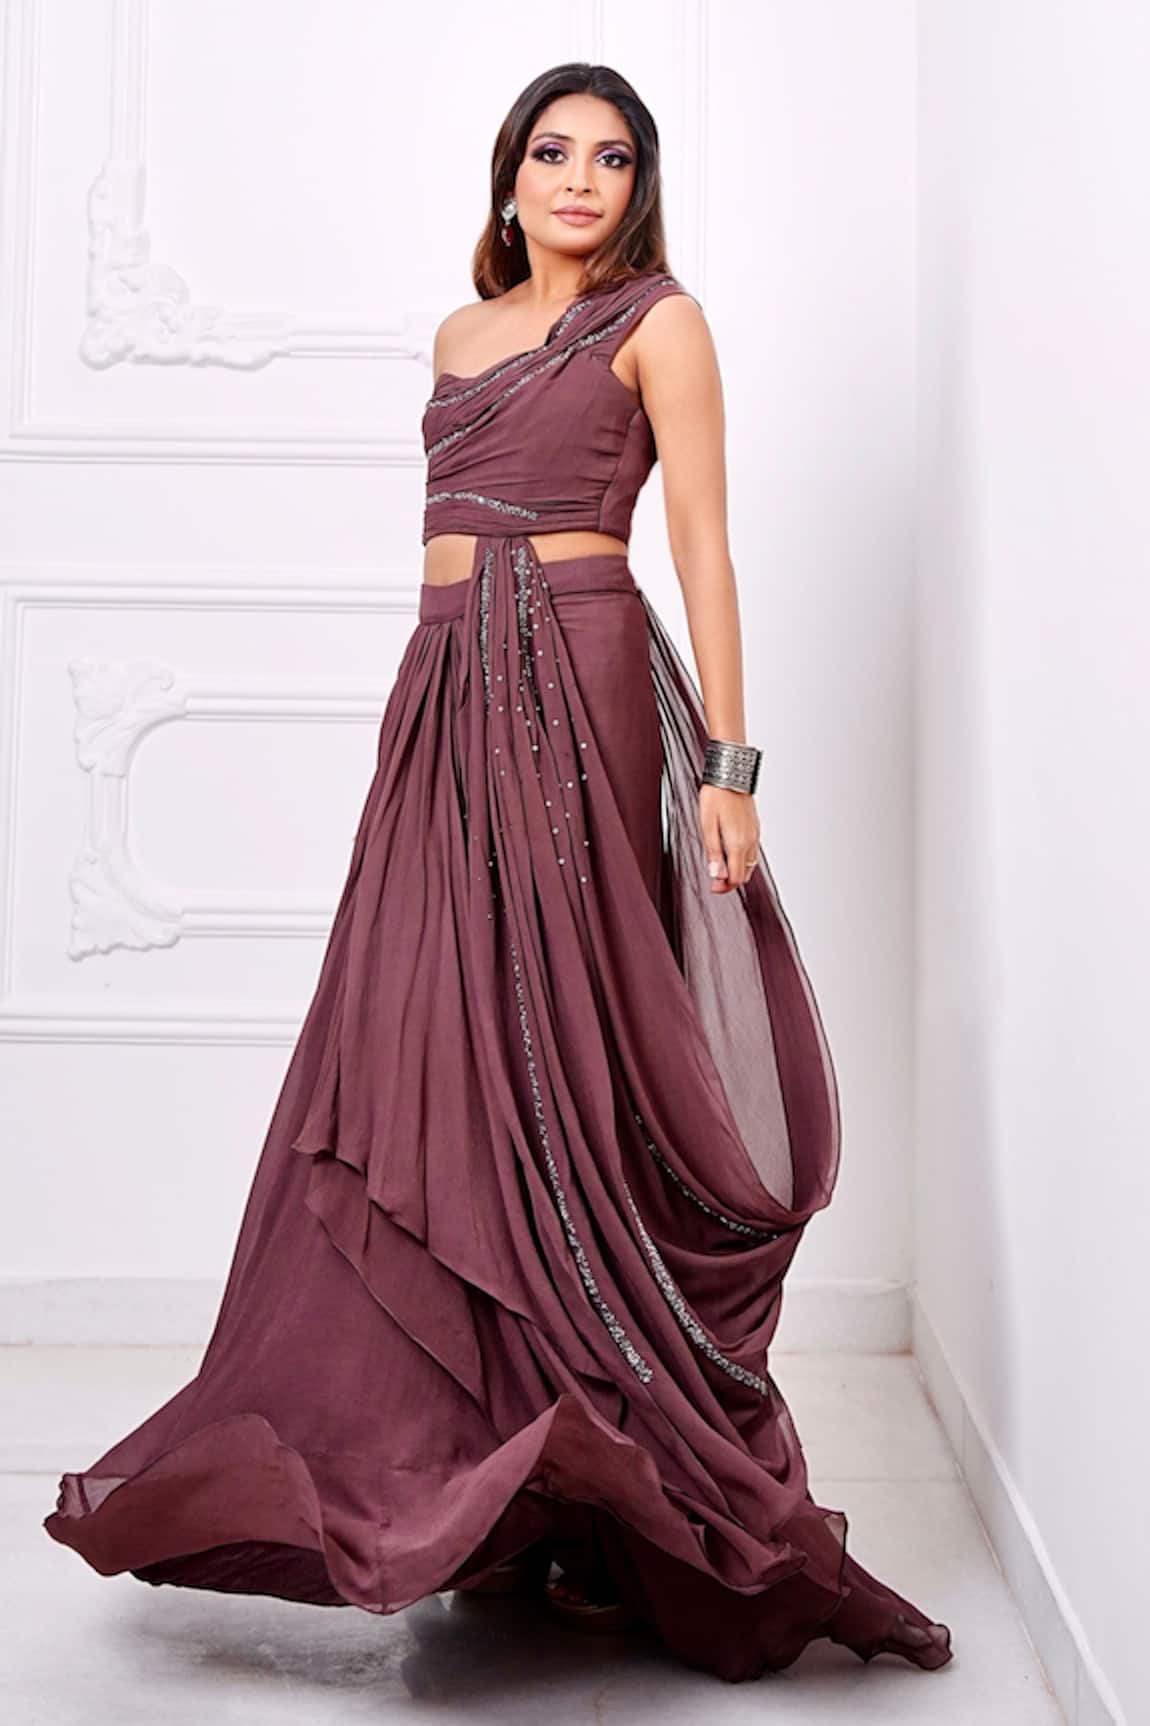 AMRTA Hand Embroidered Cocktail Saree Gown